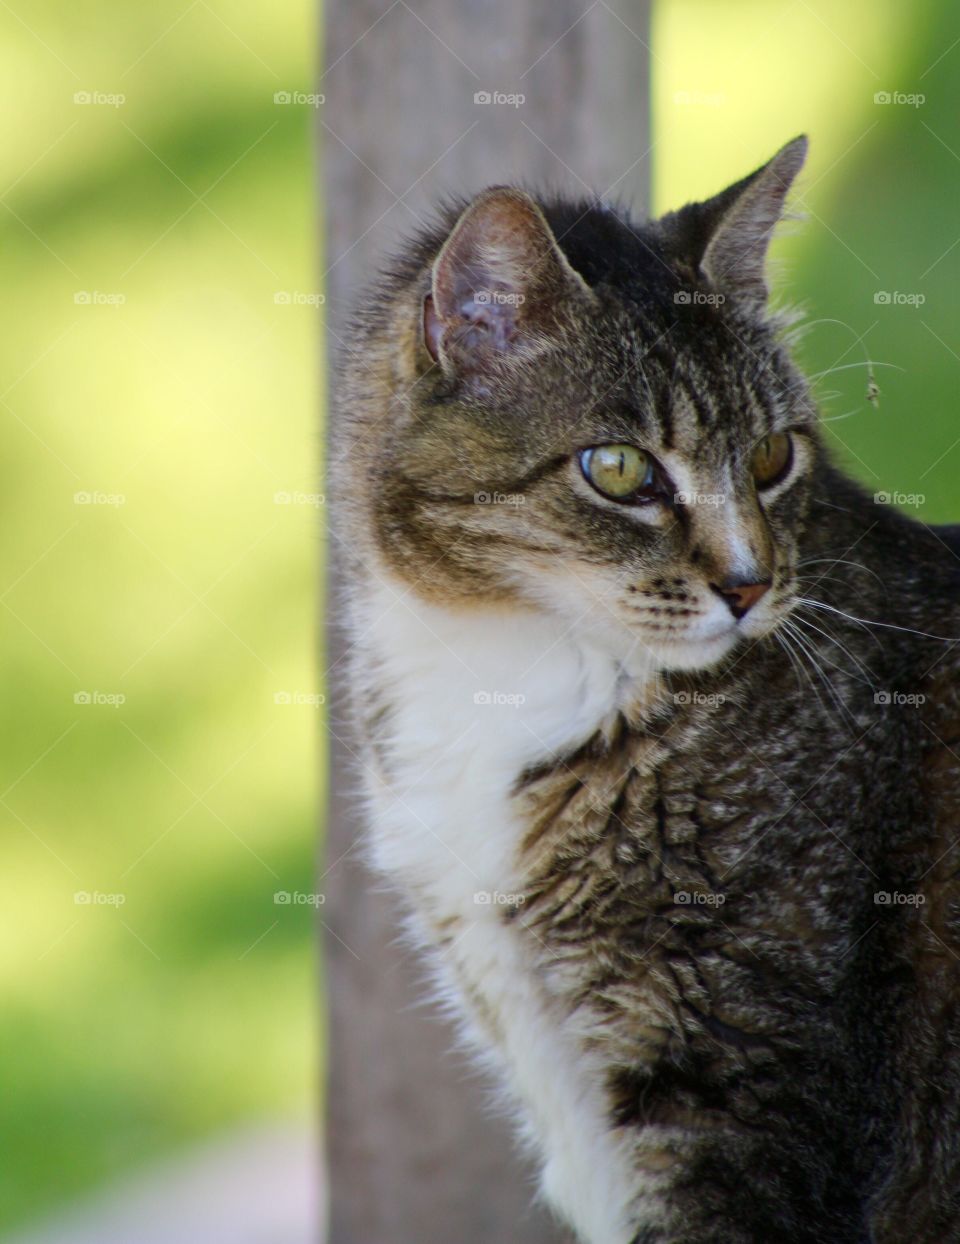 Summer Pets - a grey tabby cat next to a wooden pole with a blurred background of grass